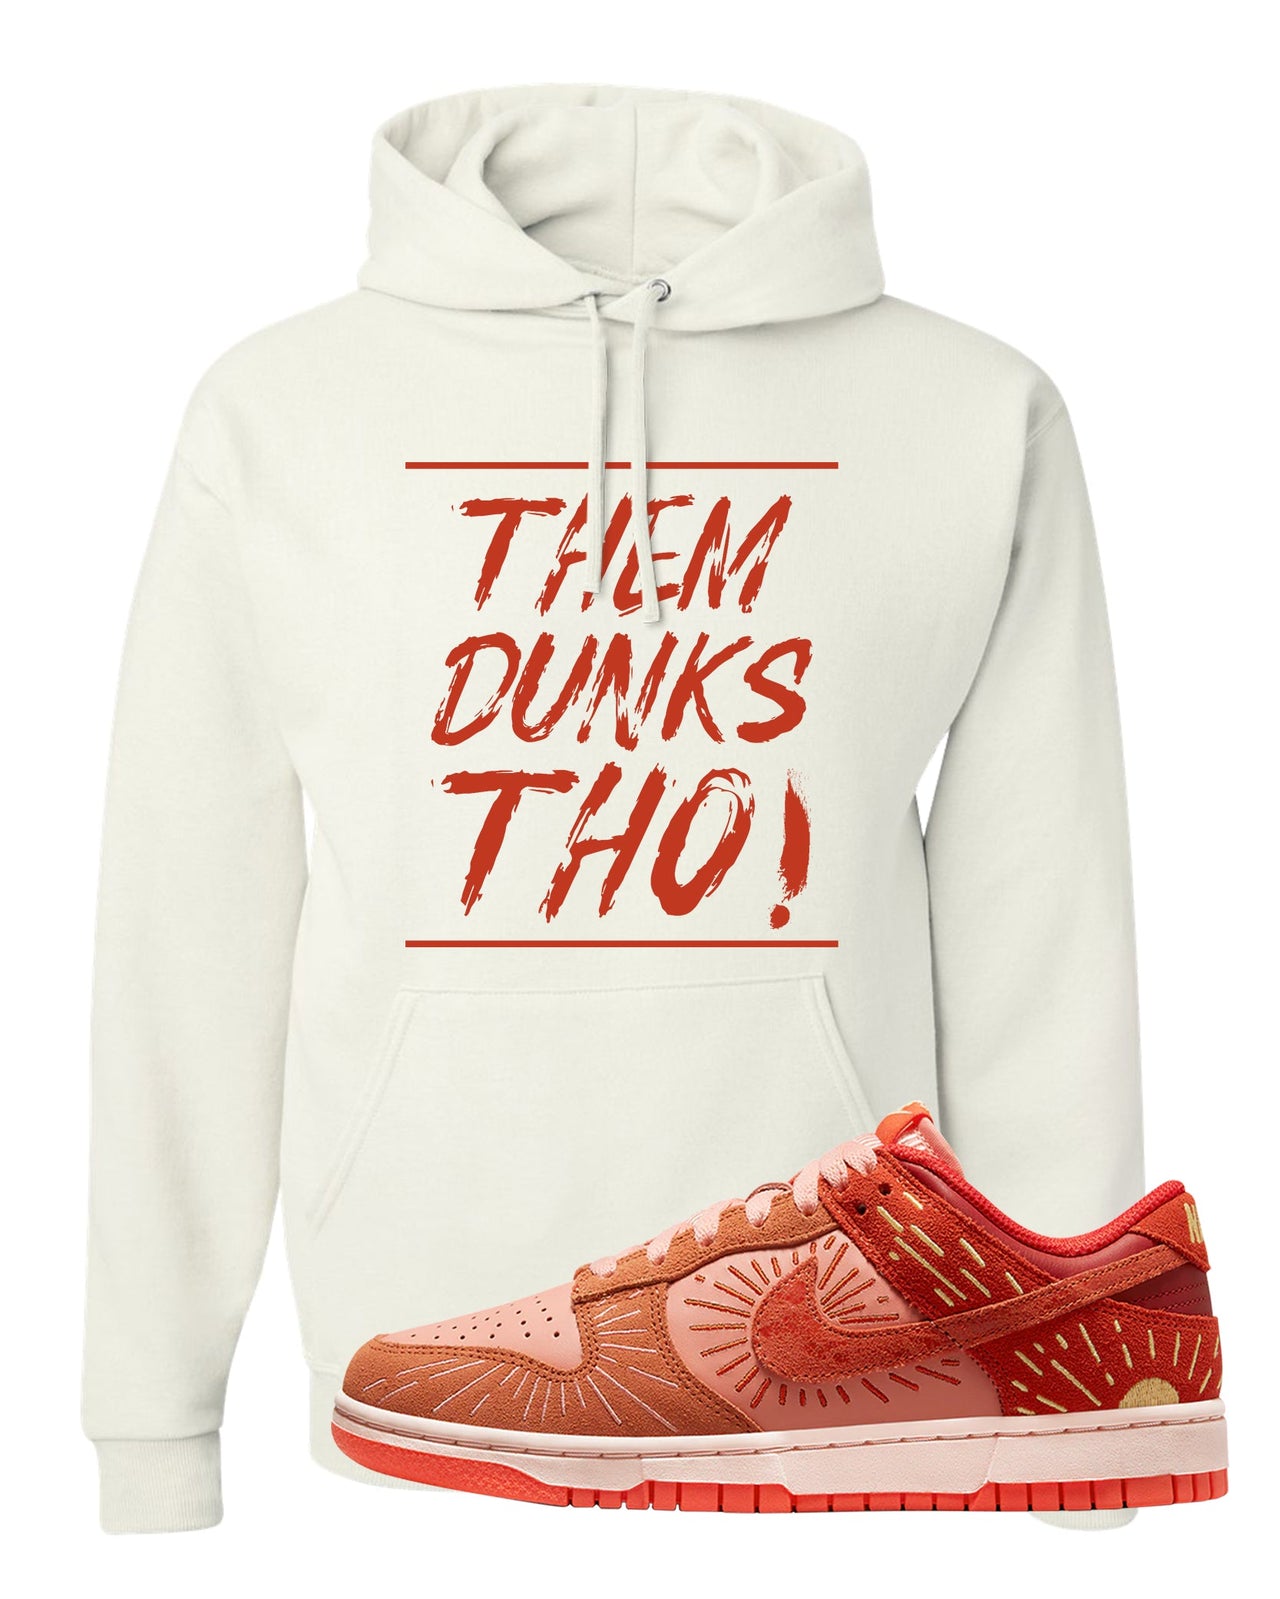 Solstice Low Dunks Hoodie | Them Dunks Tho, White